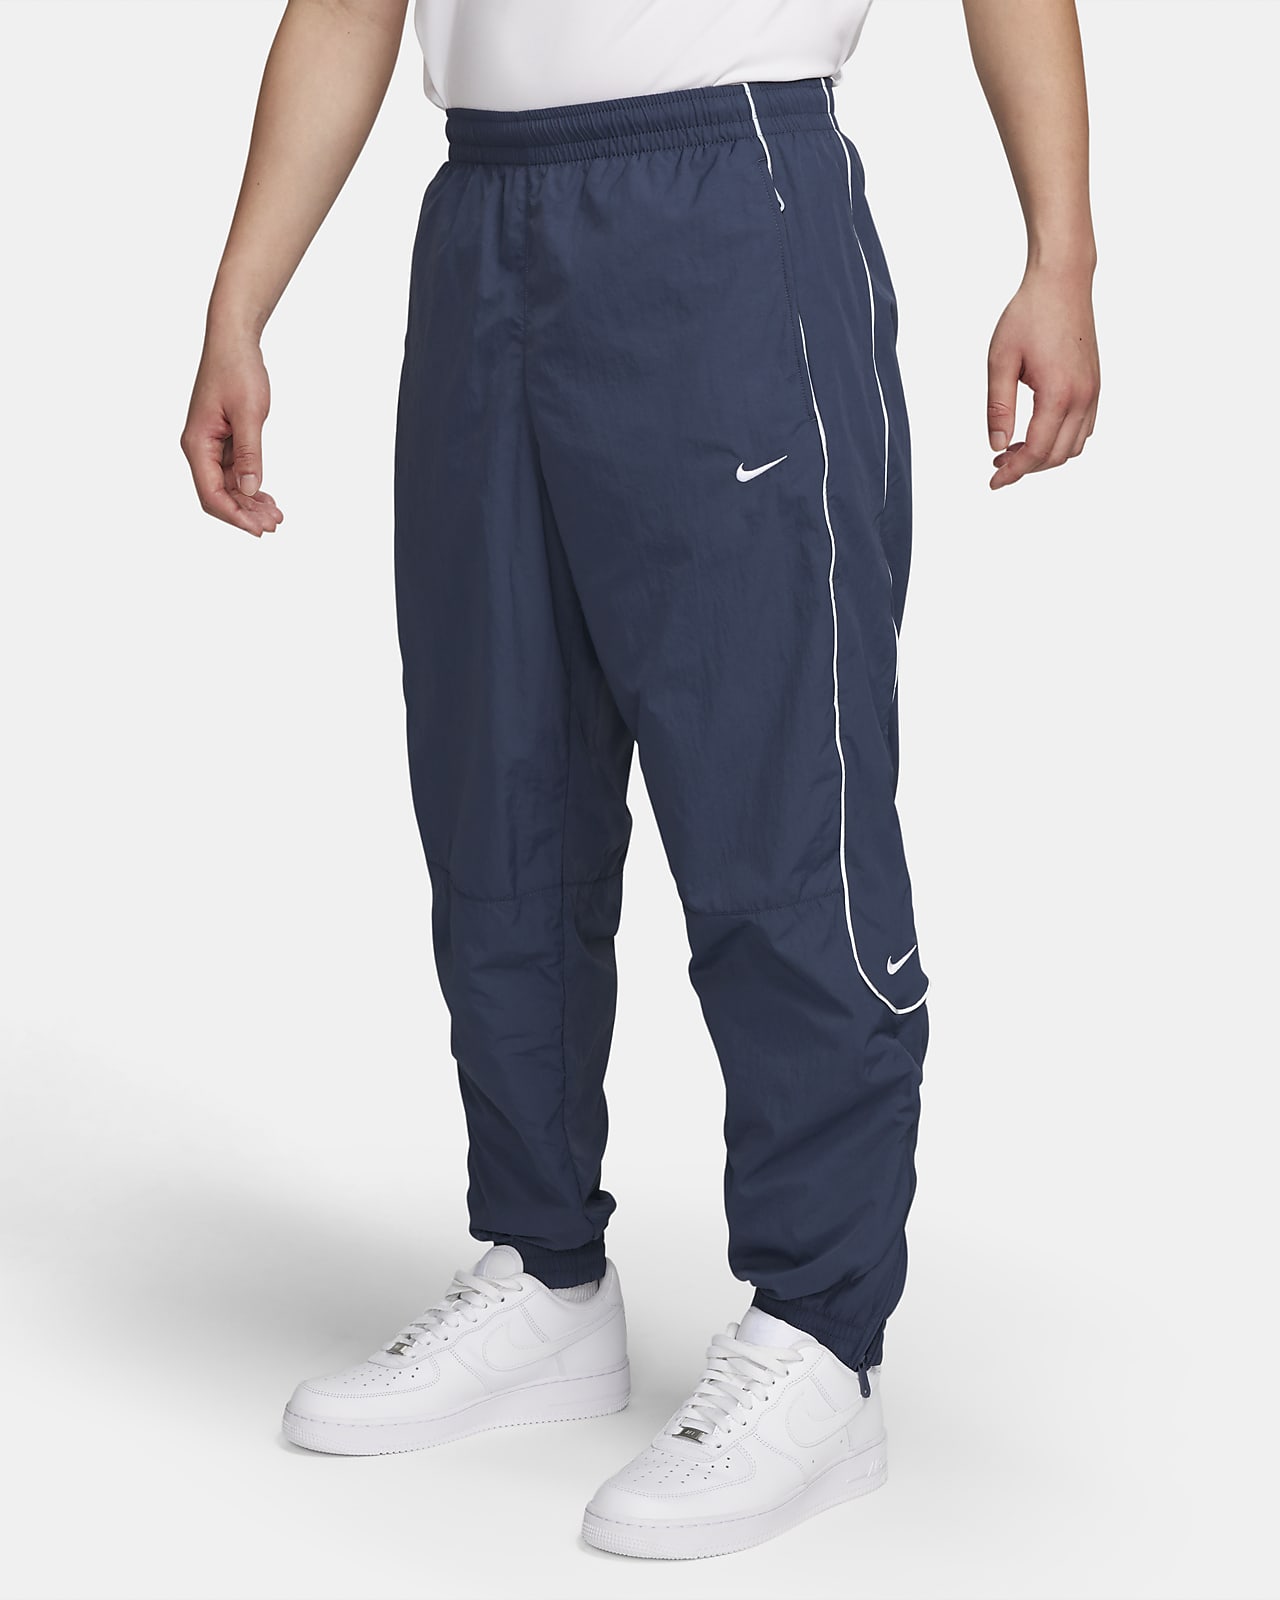 NIKE Mens Navy Track Pants. XL Size, Men's Fashion, Bottoms, Joggers on  Carousell